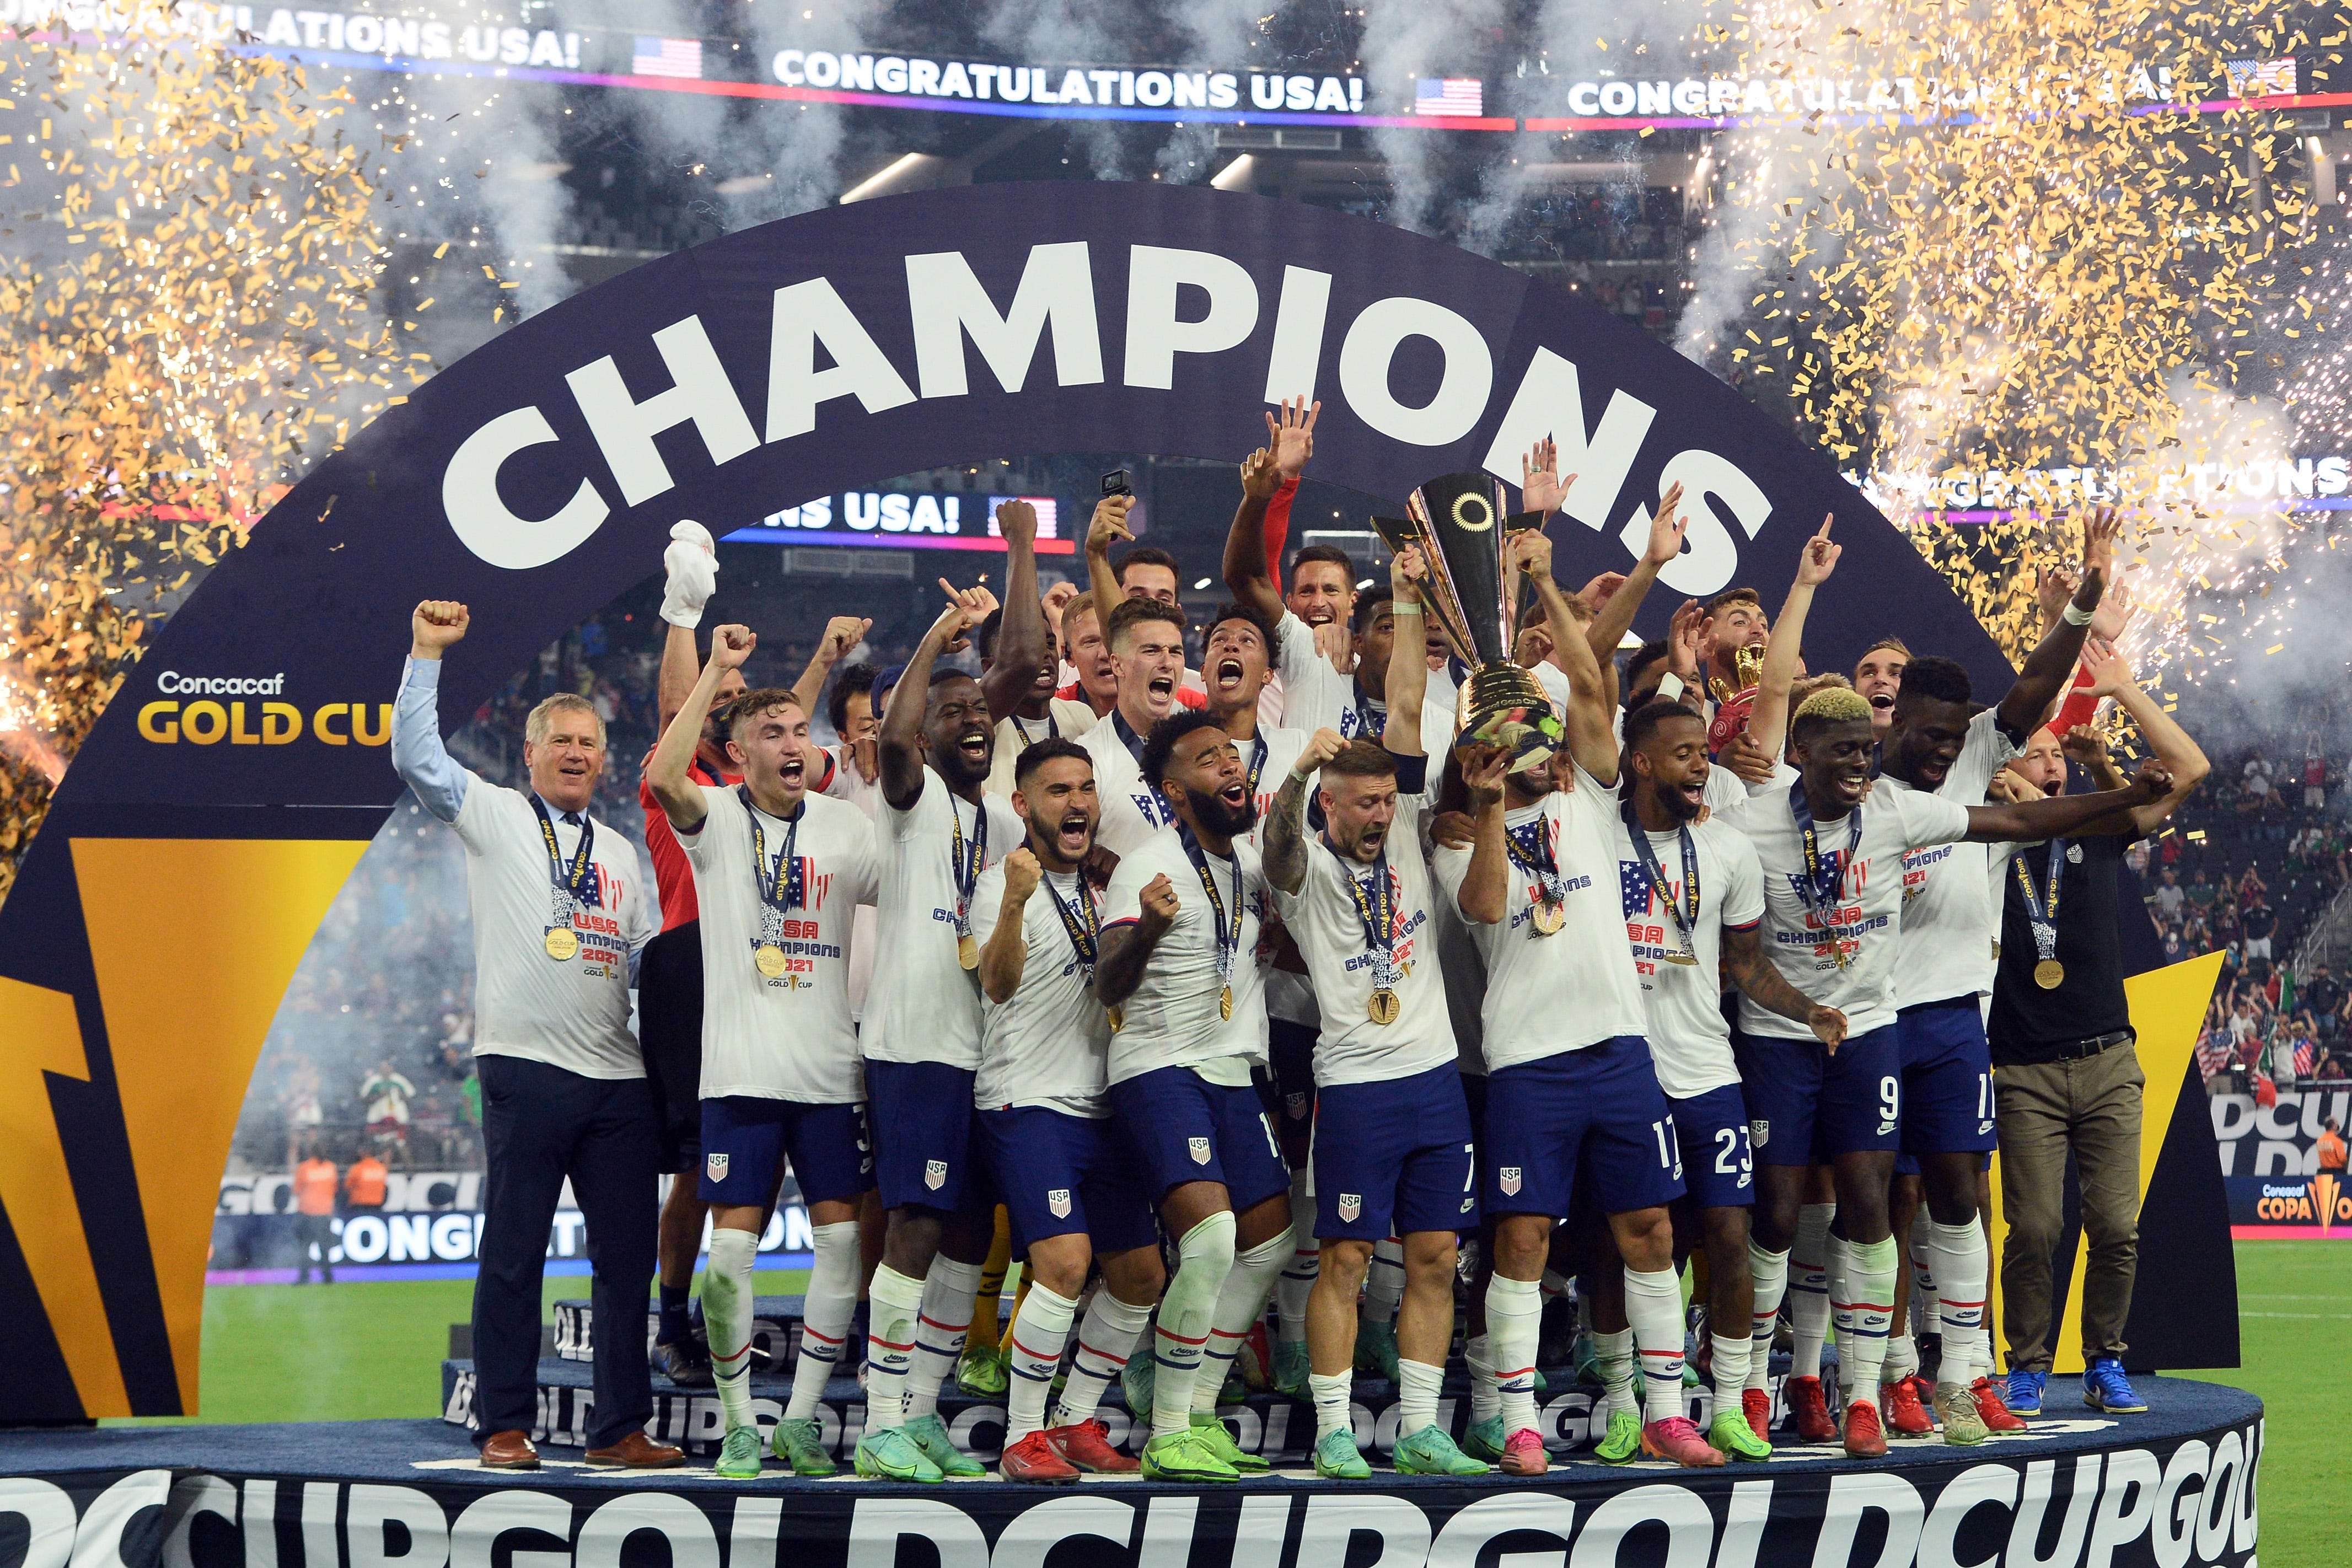 USMNT wins Concacaf Gold Cup, defeats Mexico in final